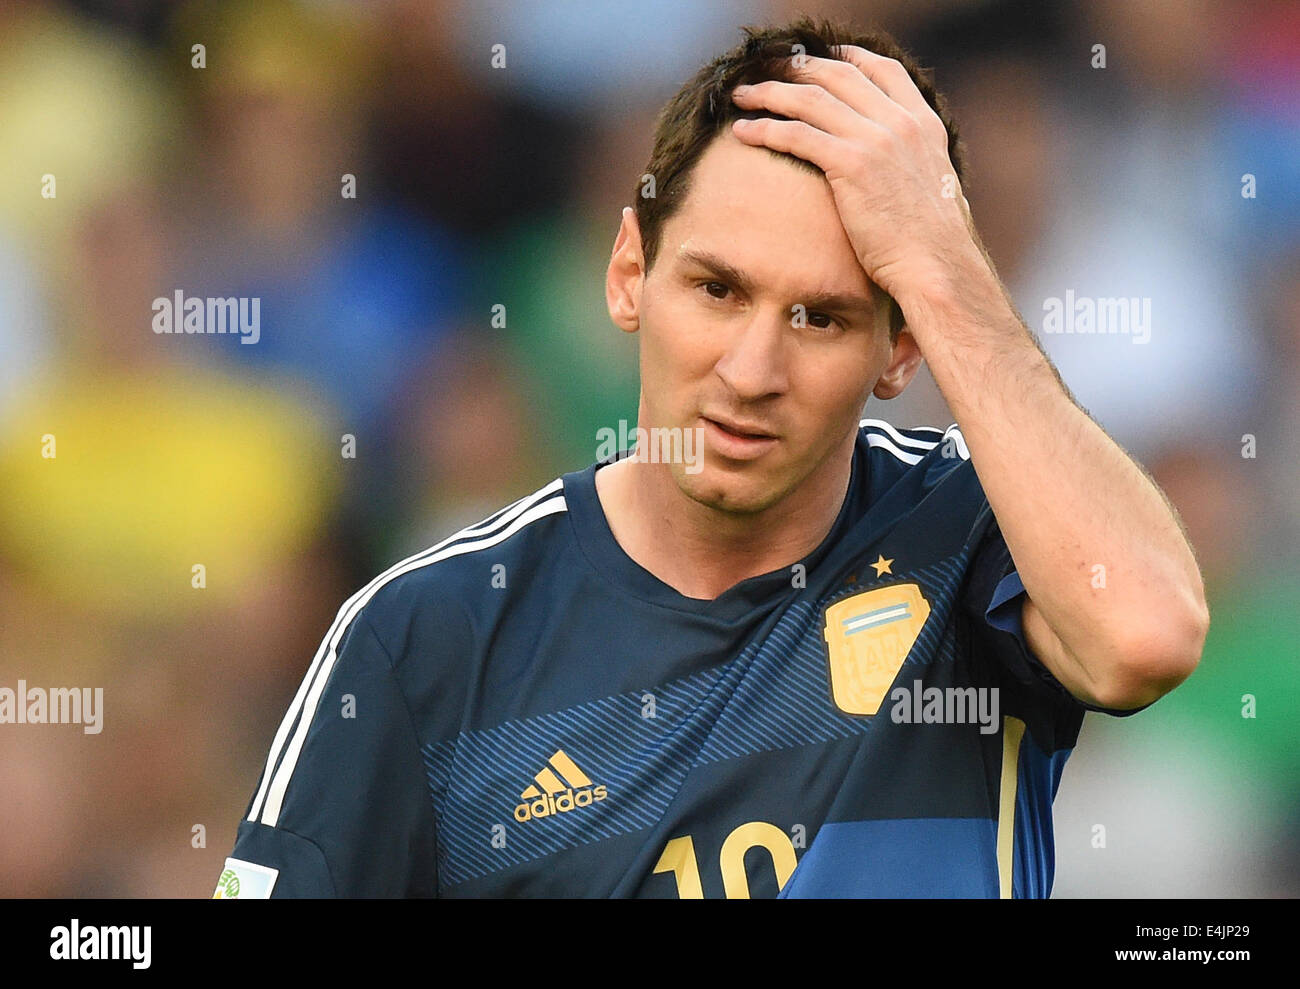 Rio de Janeiro, Brazil. 13th July, 2014. Lionel Messi of Argentina reacts during the FIFA World Cup 2014 final soccer match between Germany and Argentina at the Estadio do Maracana in Rio de Janeiro, Brazil, 13 July 2014. Photo: Marcus Brandt/dpa/Alamy Live News Stock Photo